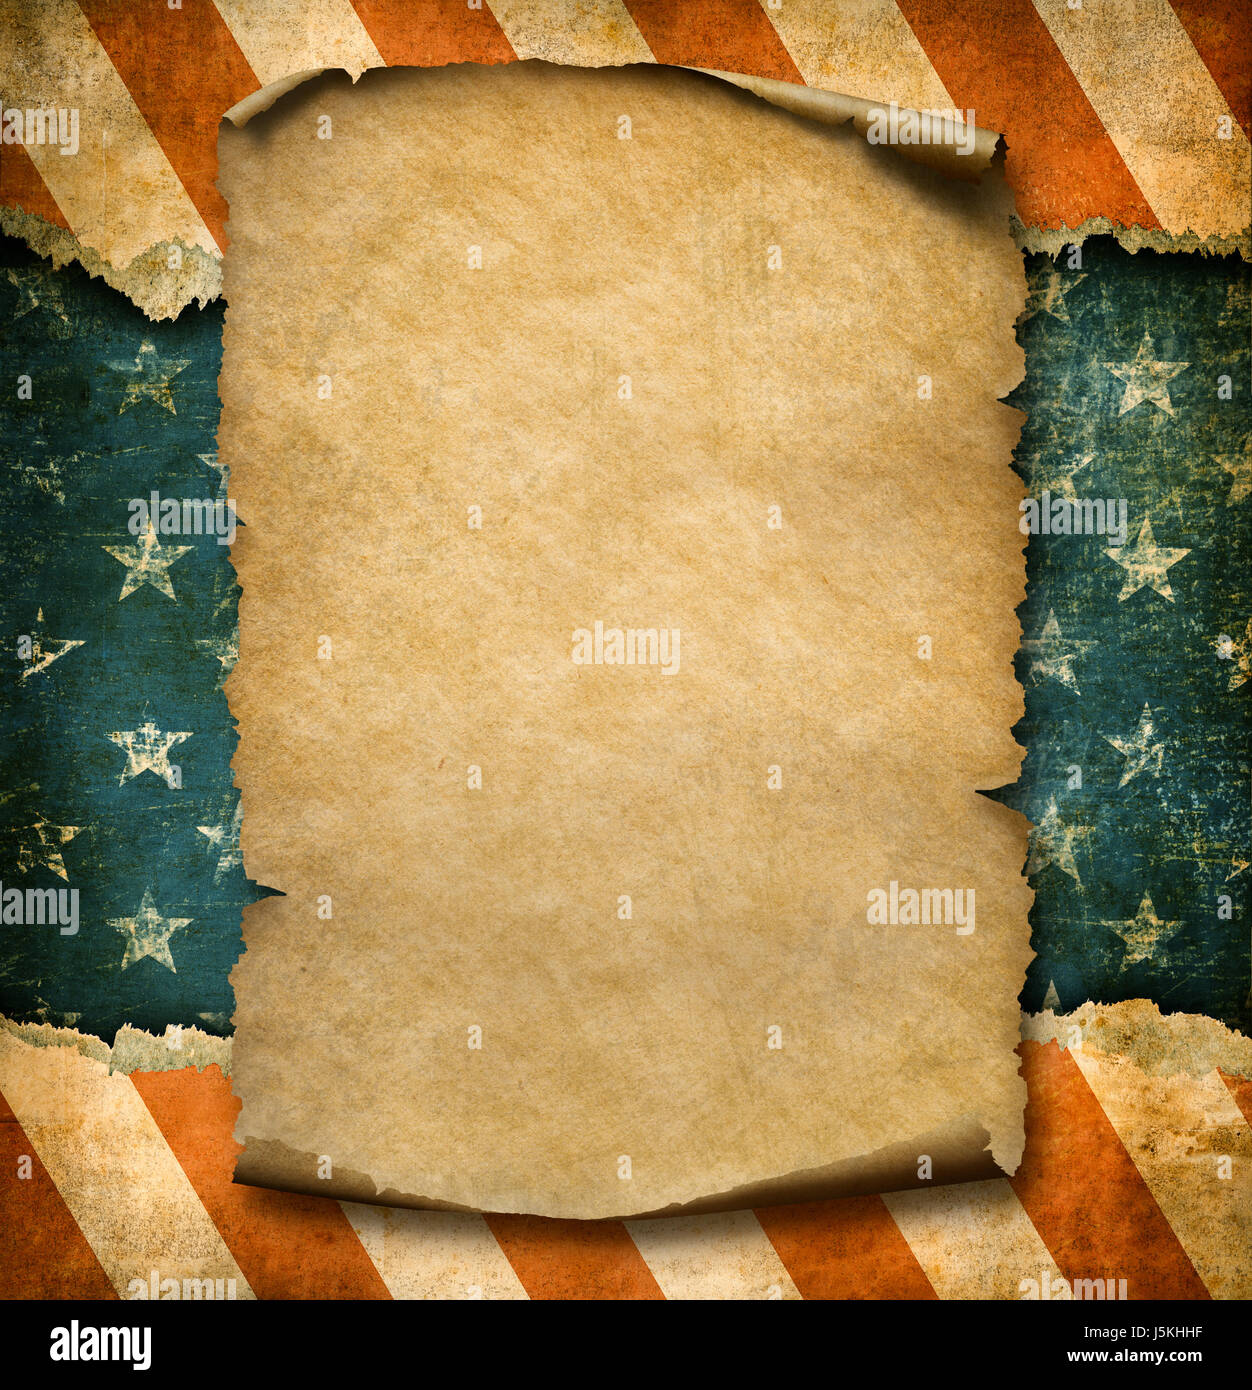 Grunge blank paper declaration over USA flag independence day template 3d illustration Stock Photo